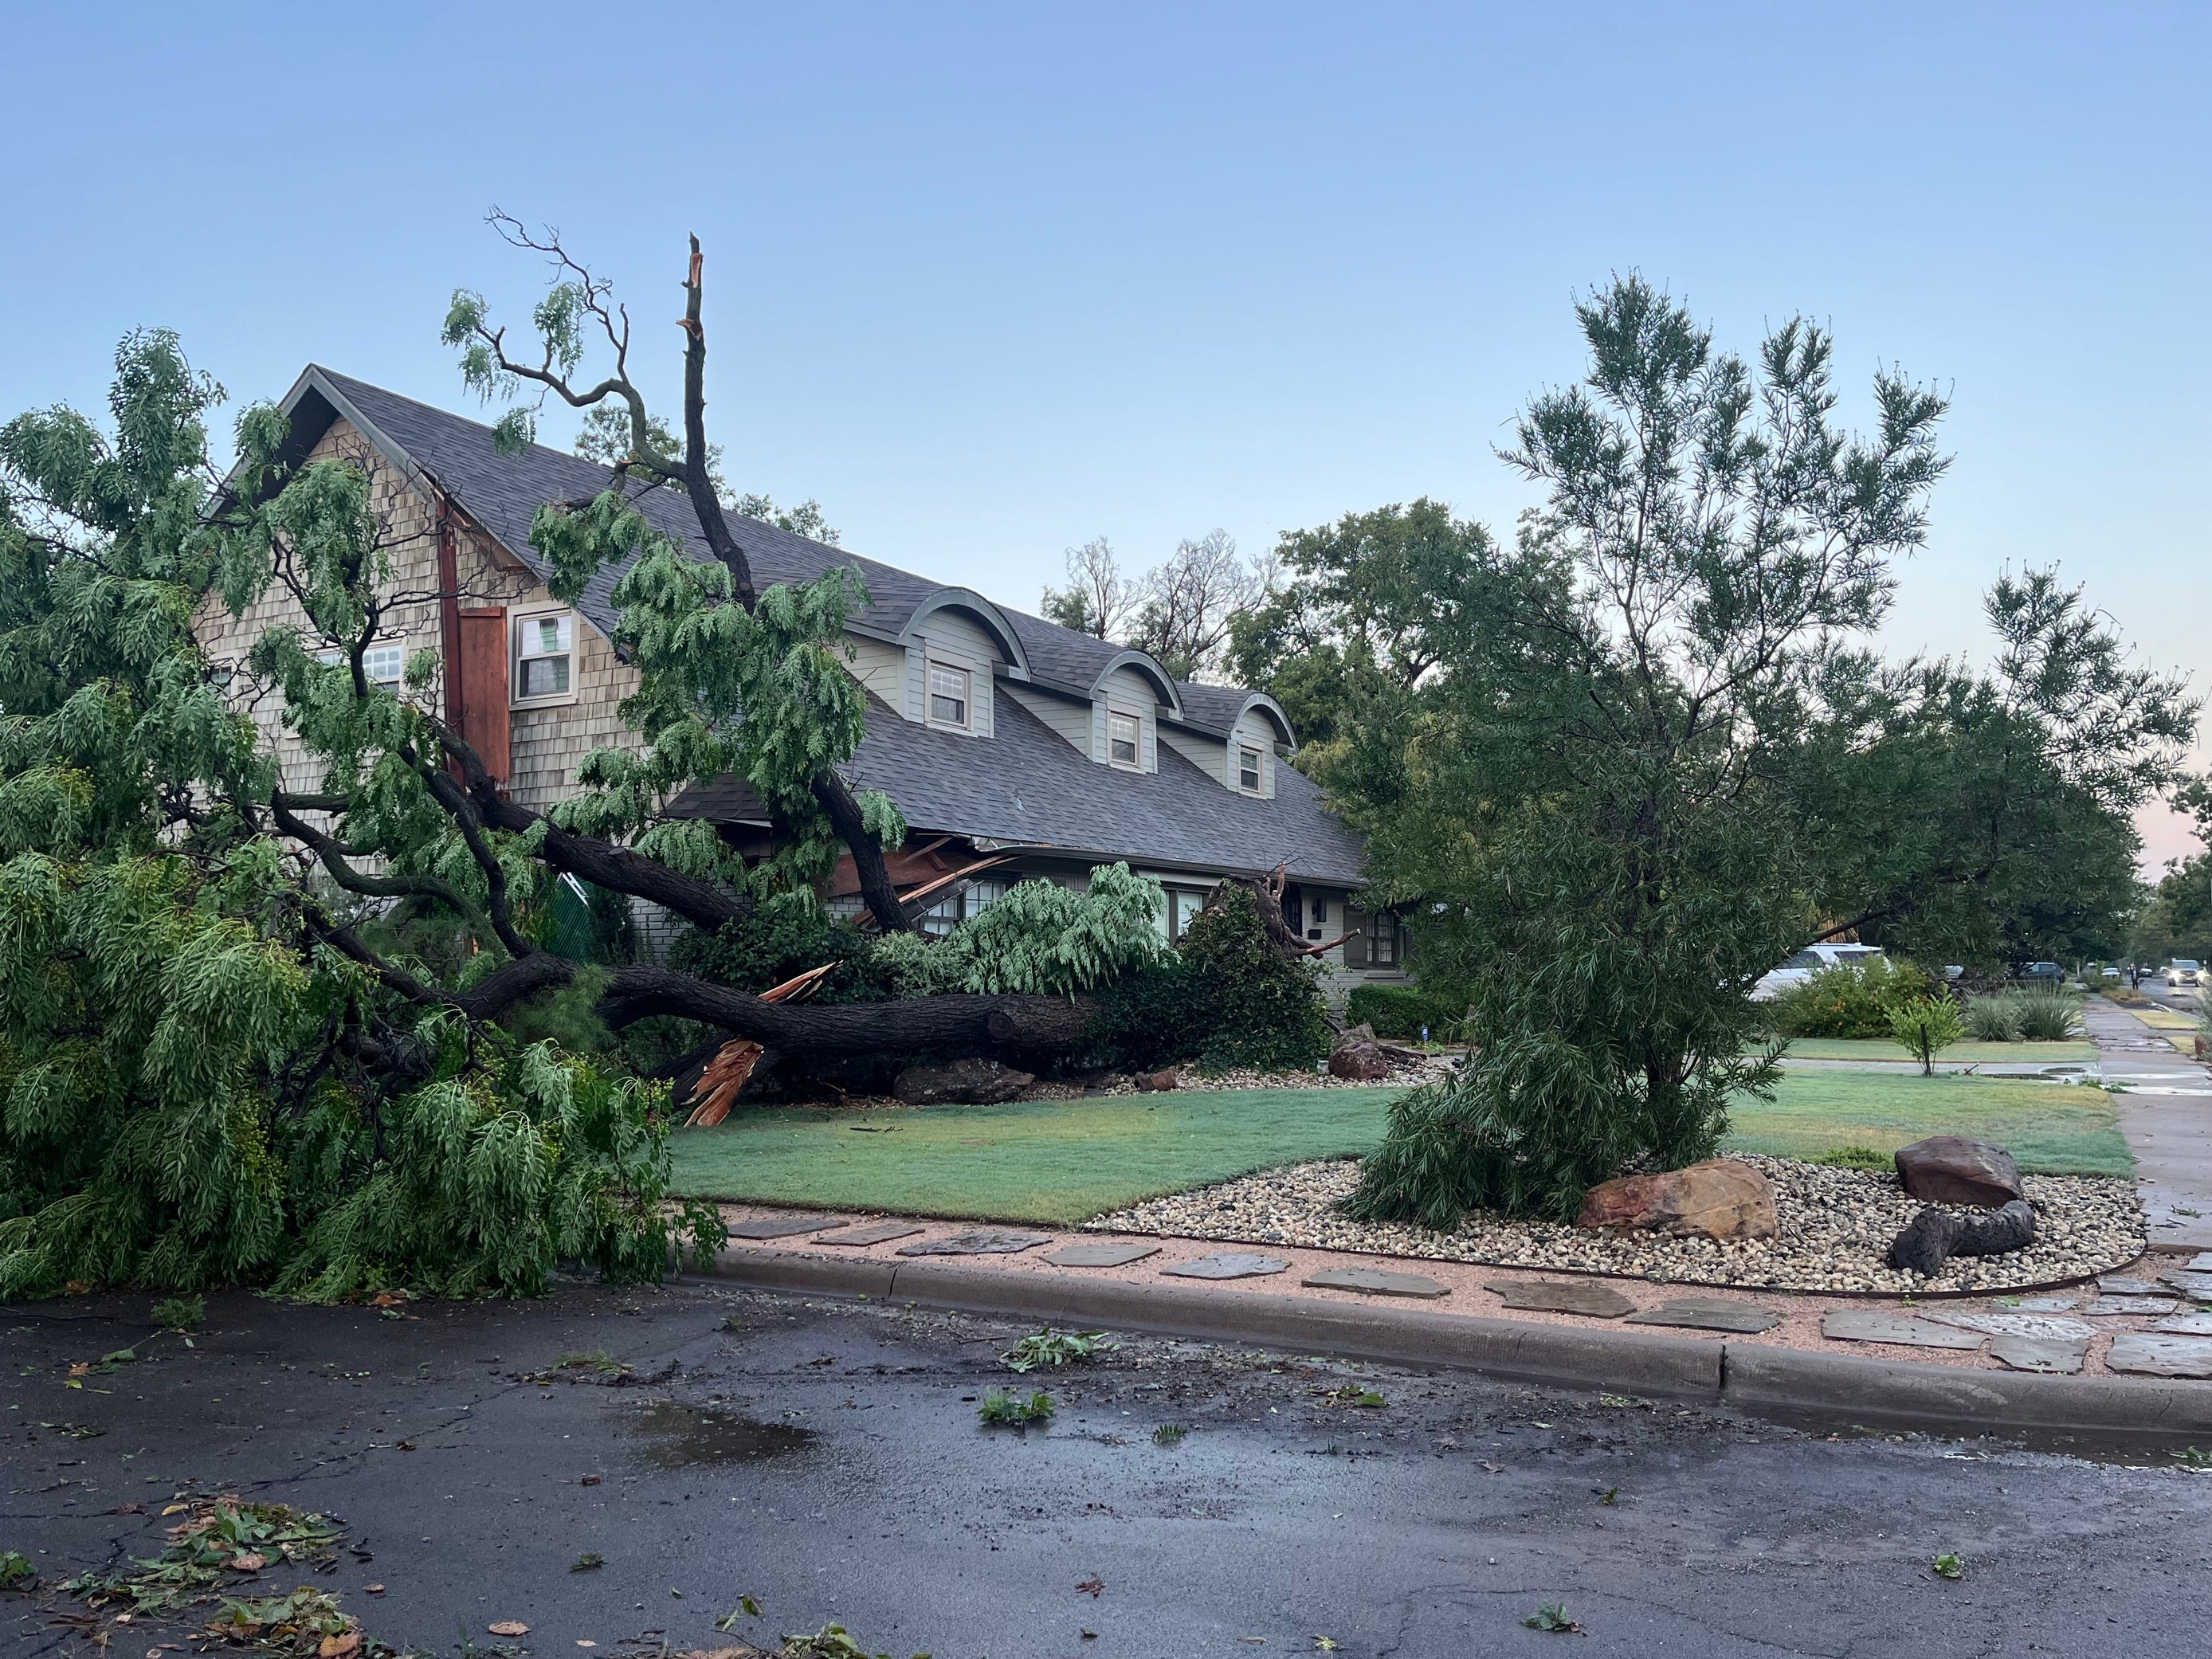 A large tree was downed by high winds early Friday, Sept. 15, near 22nd Street and Canton Avenue as a potent line of storms moved through Lubbock and the South Plains, bringing widespread damage and prompting power outages.